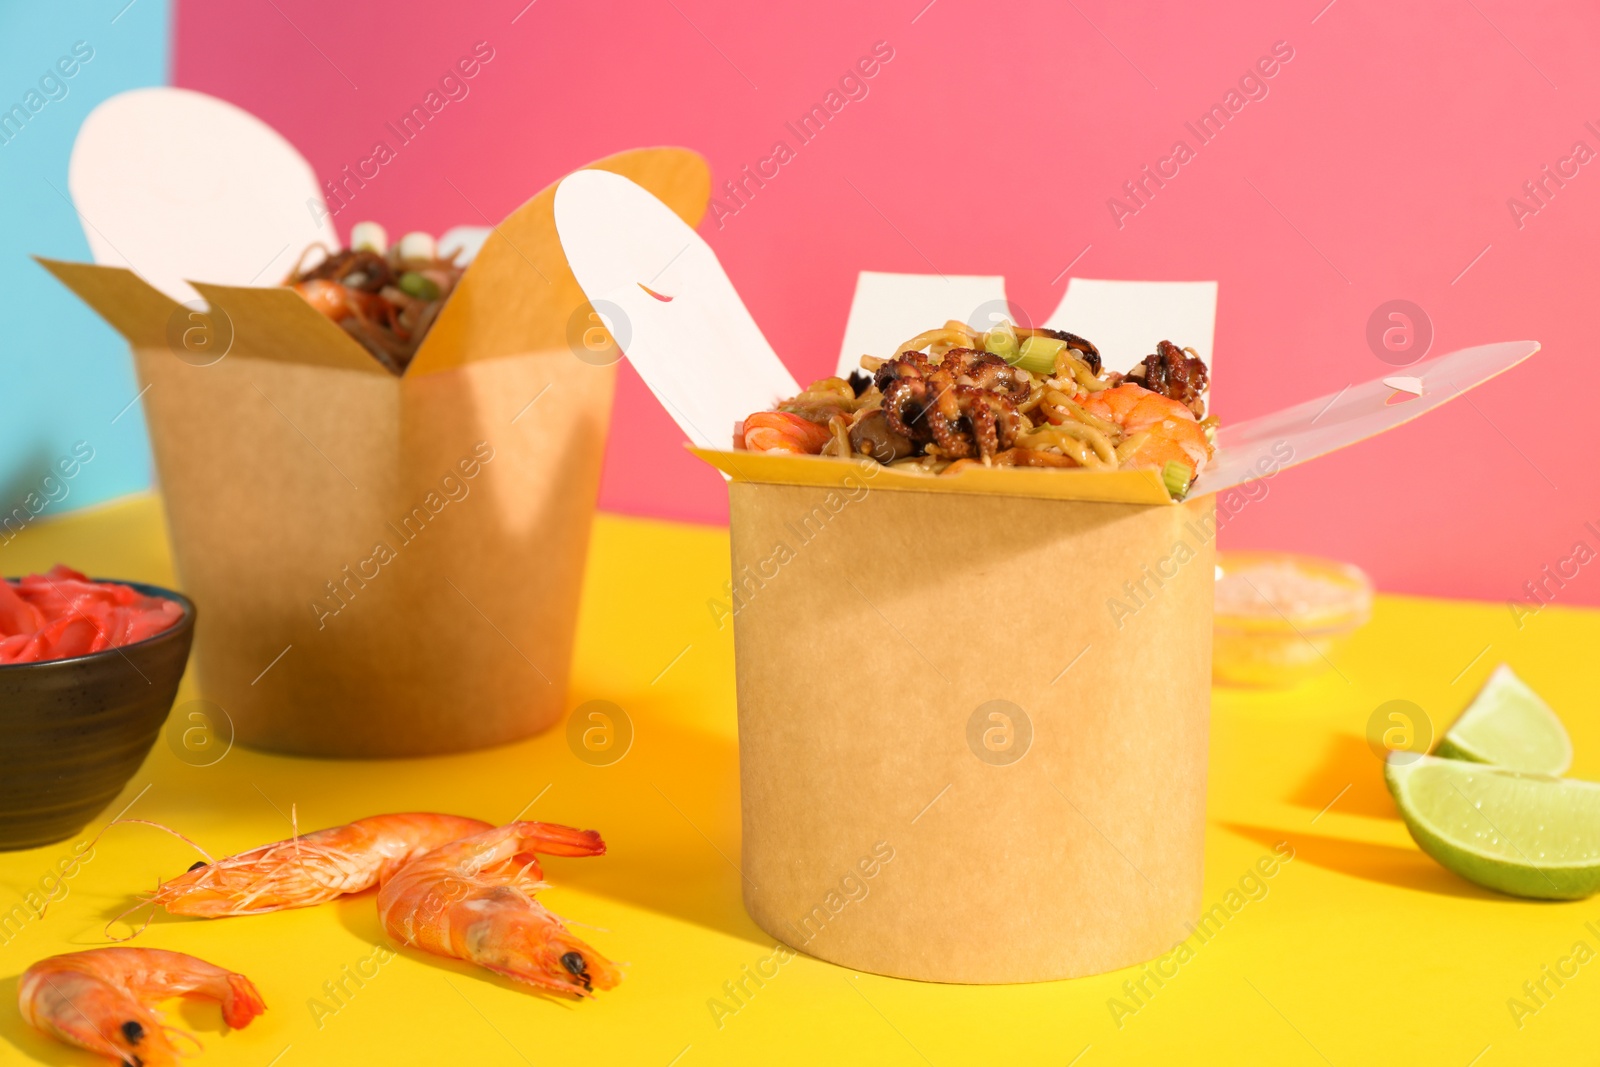 Photo of Boxes of wok noodles with seafood on color background, closeup